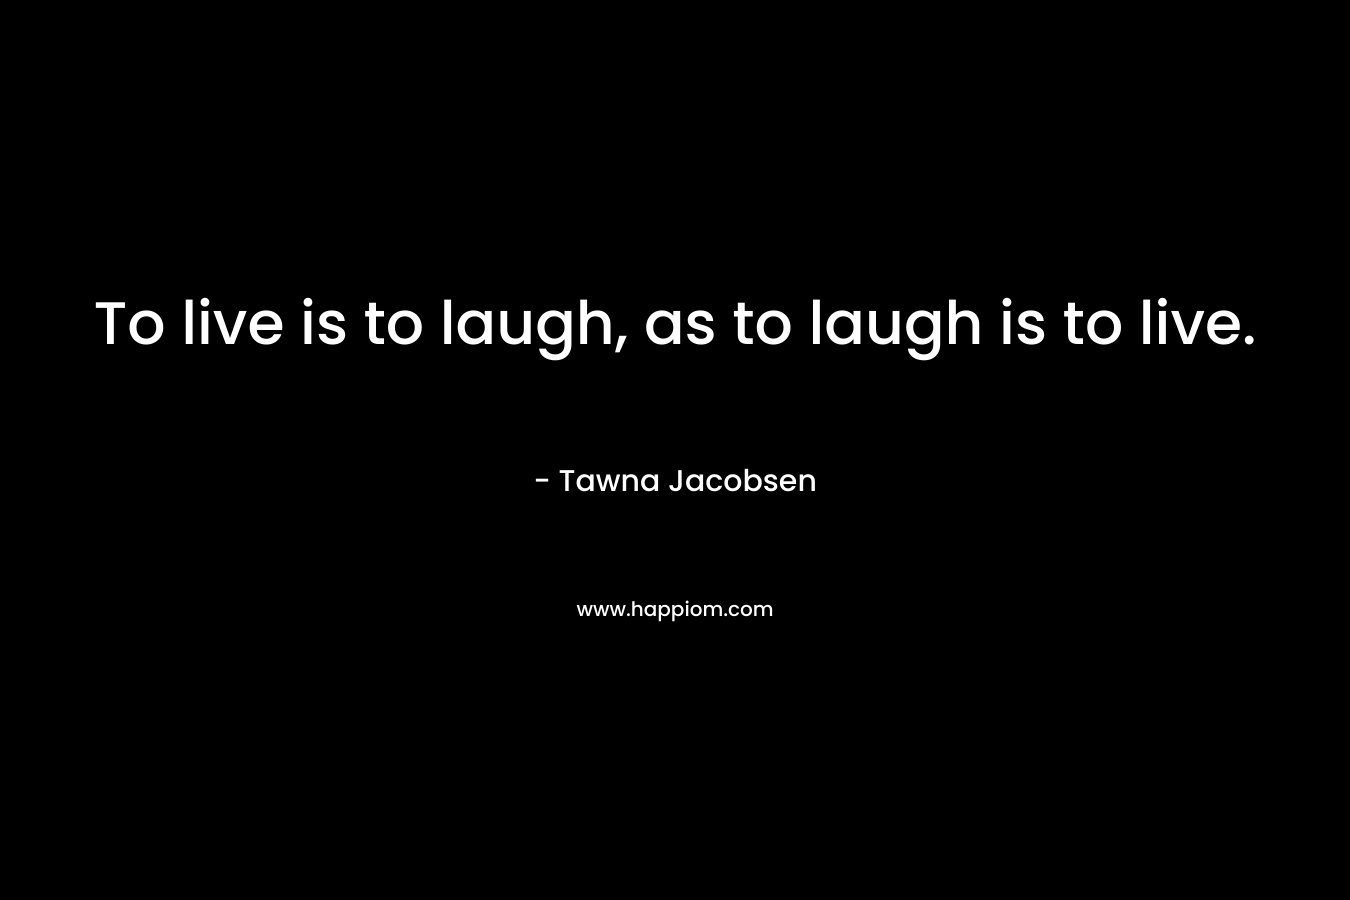 To live is to laugh, as to laugh is to live.